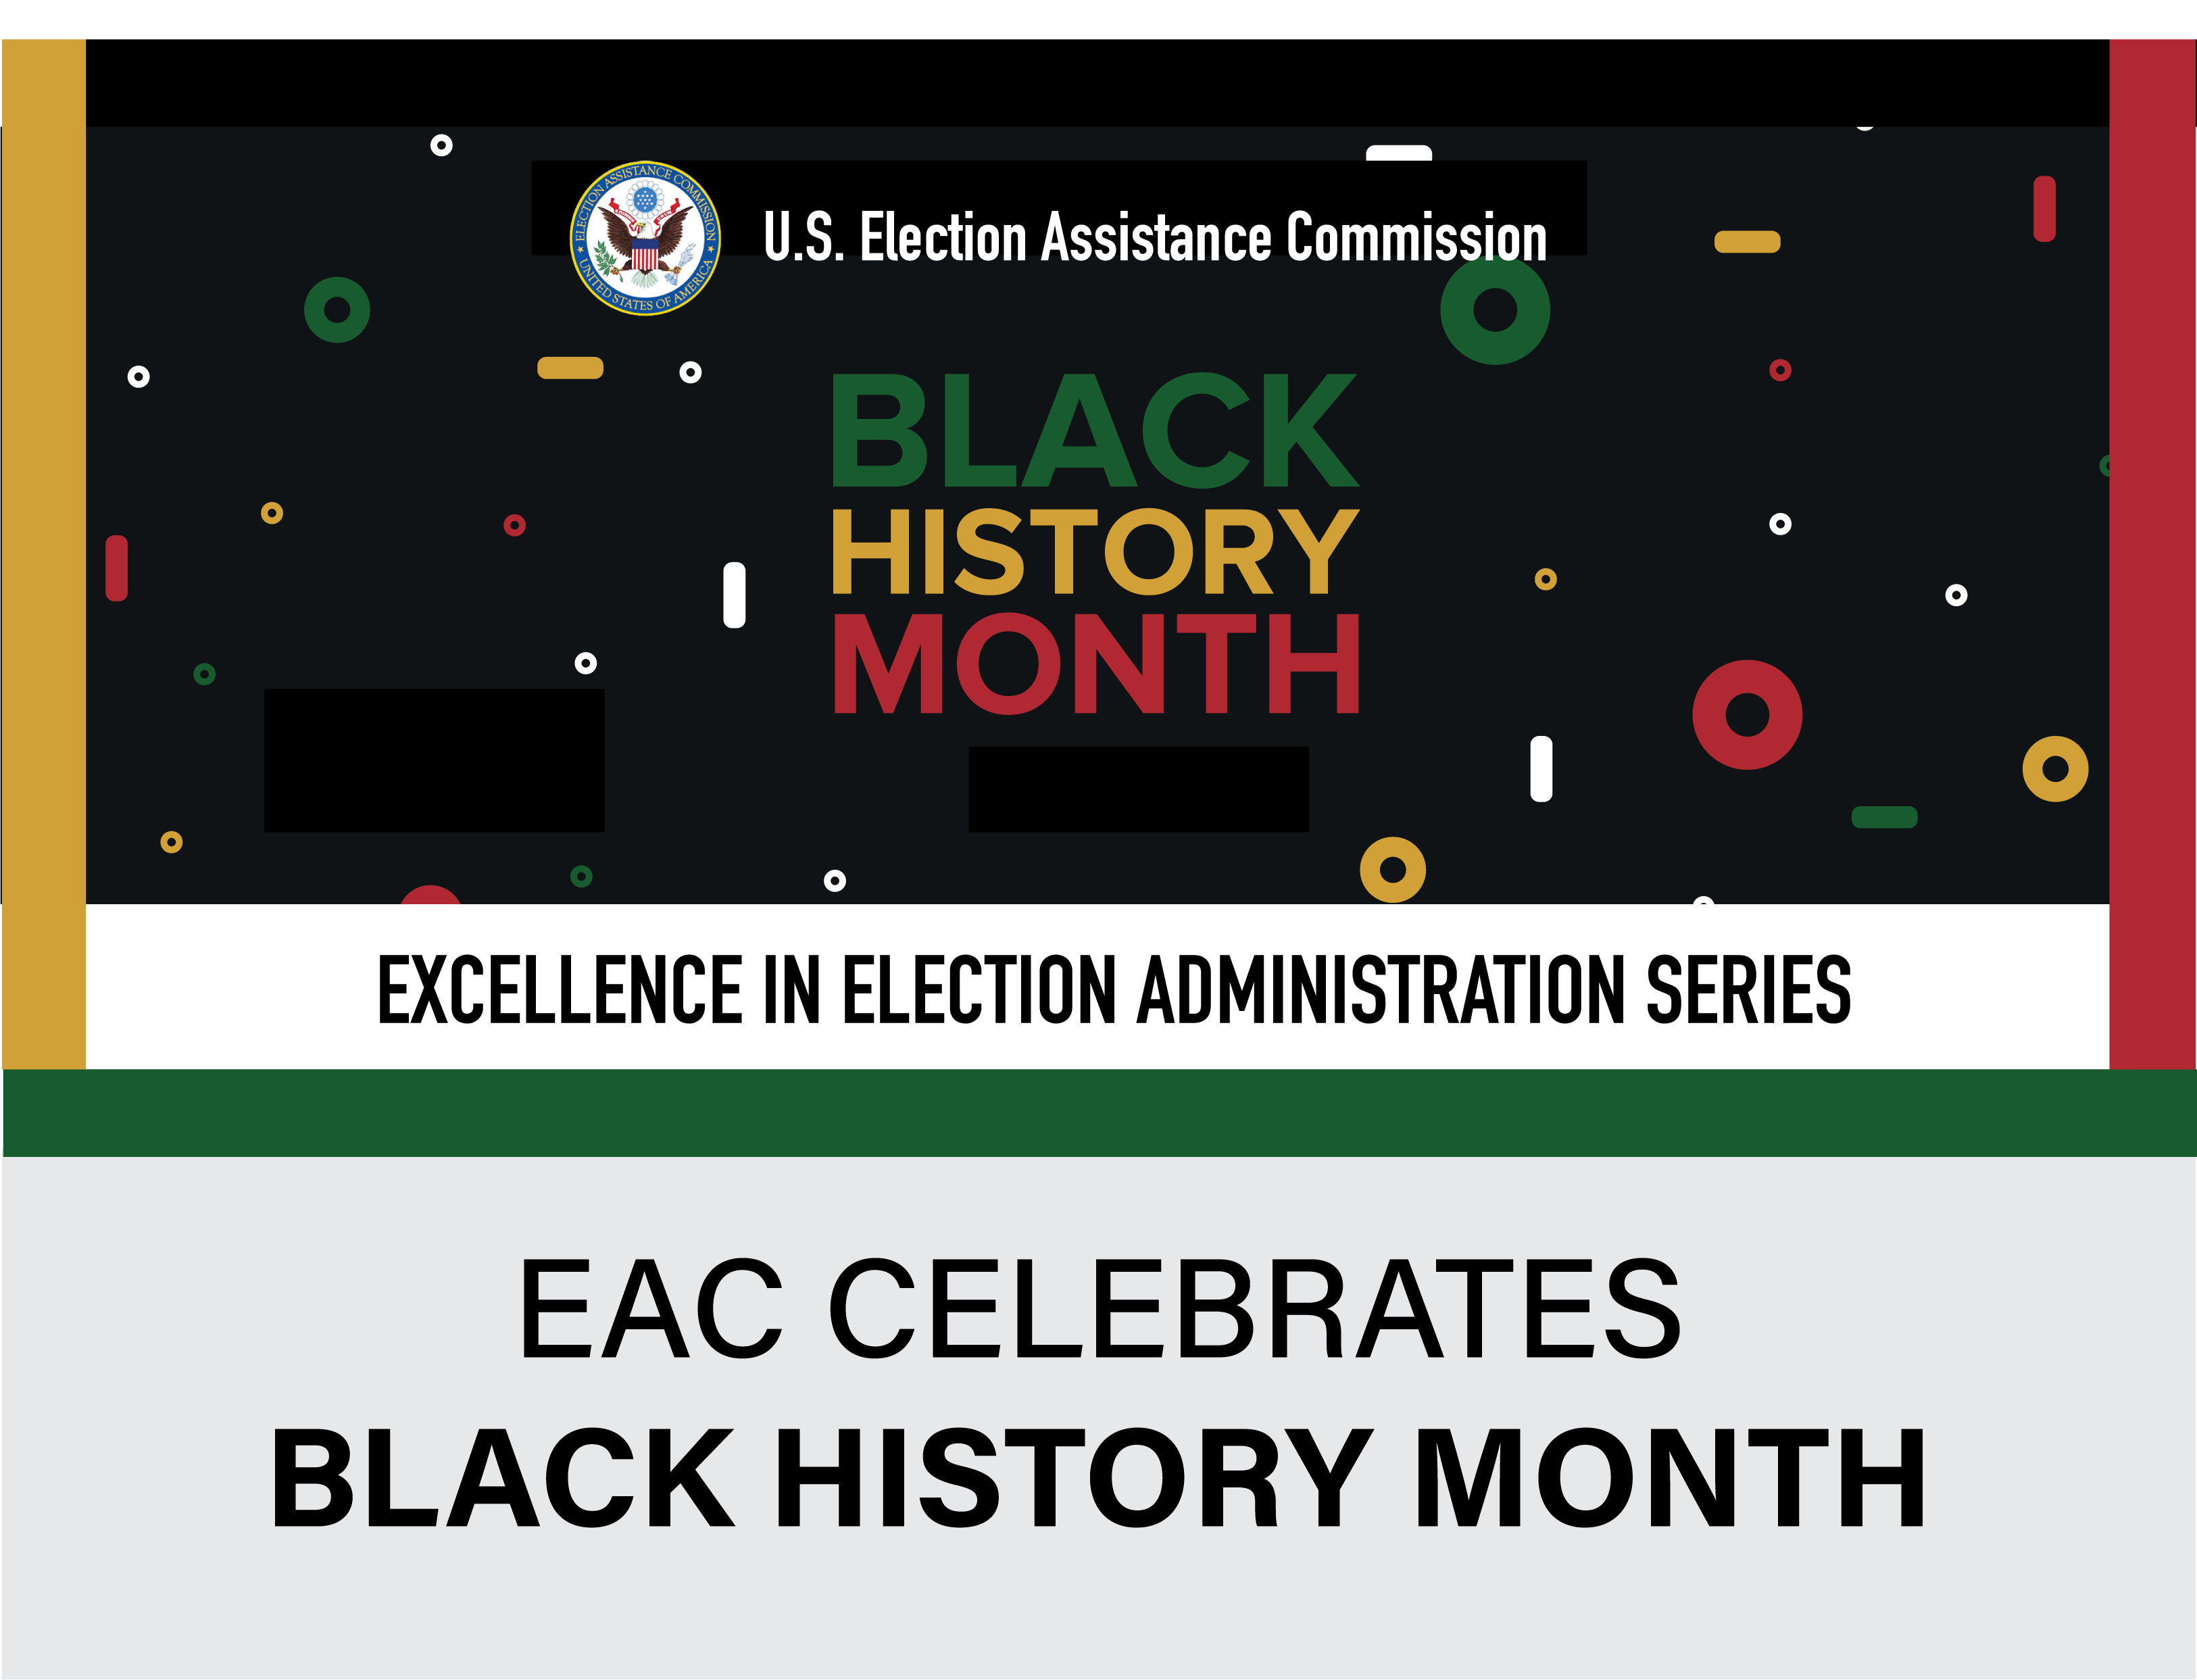 EAC Celebrates Black History Month. Excellence in Election Administration series